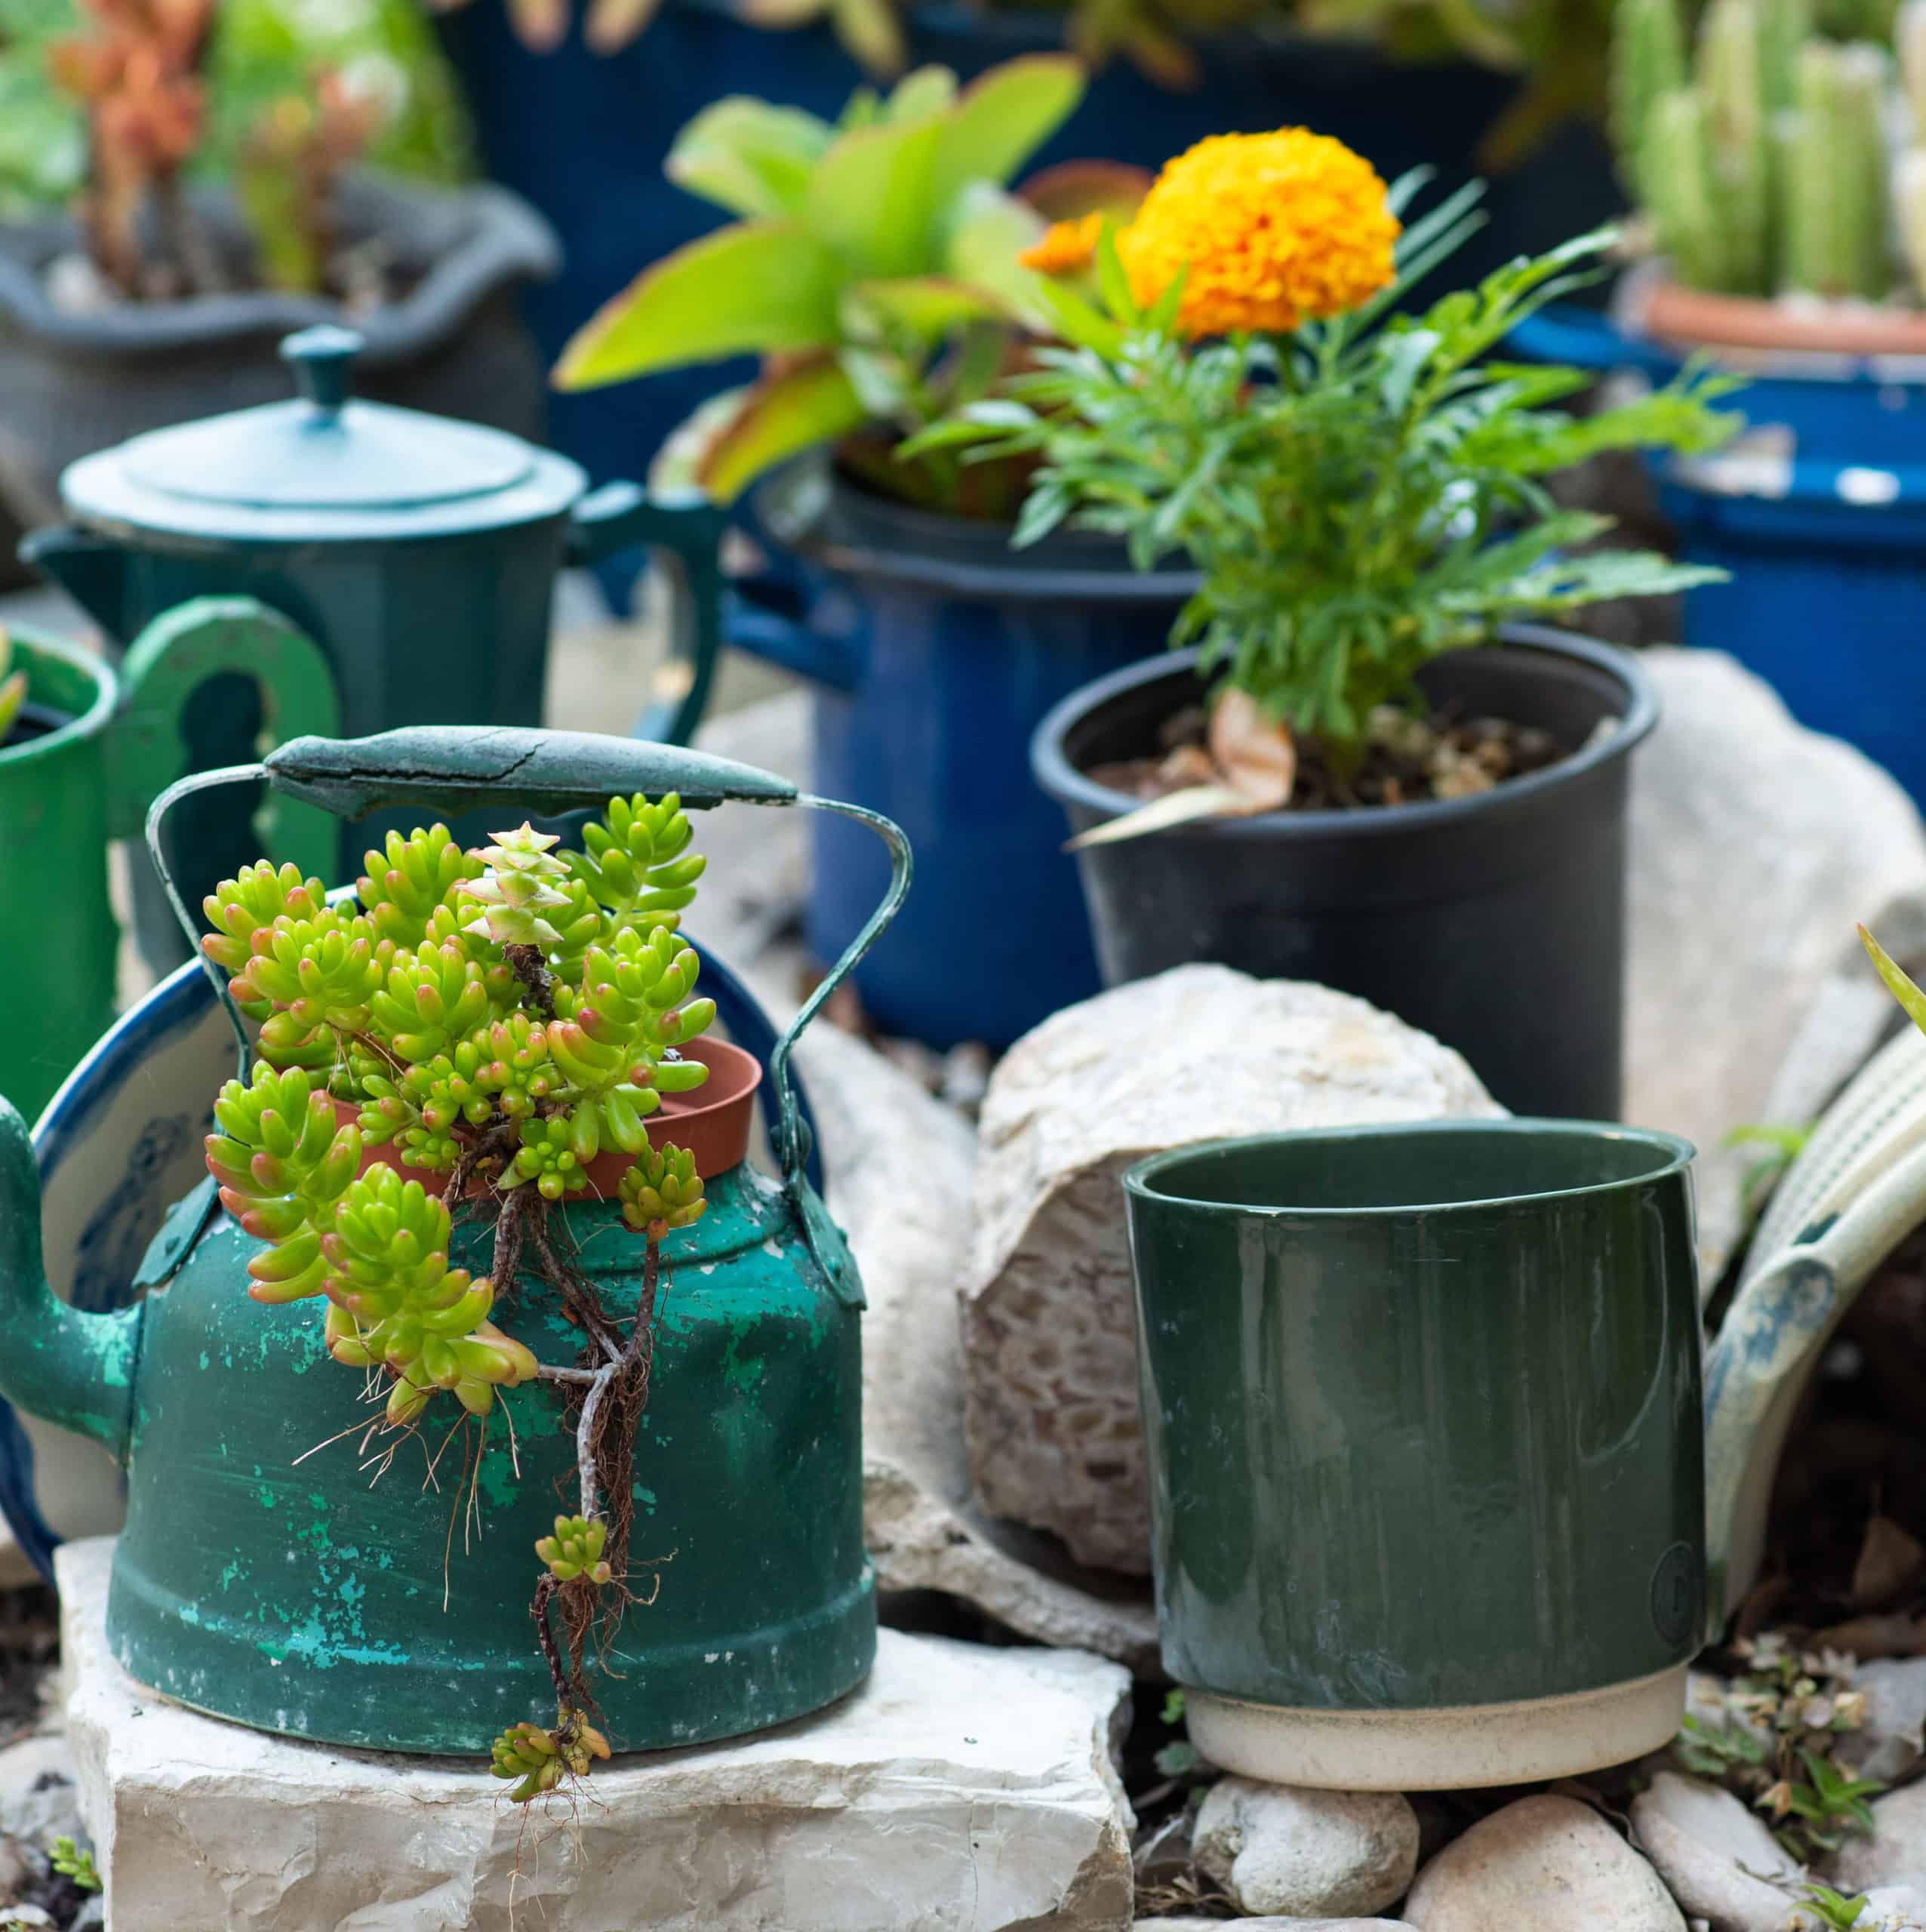 Reduce, reuse, recycle planter, craft ideas. Second-hand kettles, saucepans, old teapots turned into garden flower pots. 